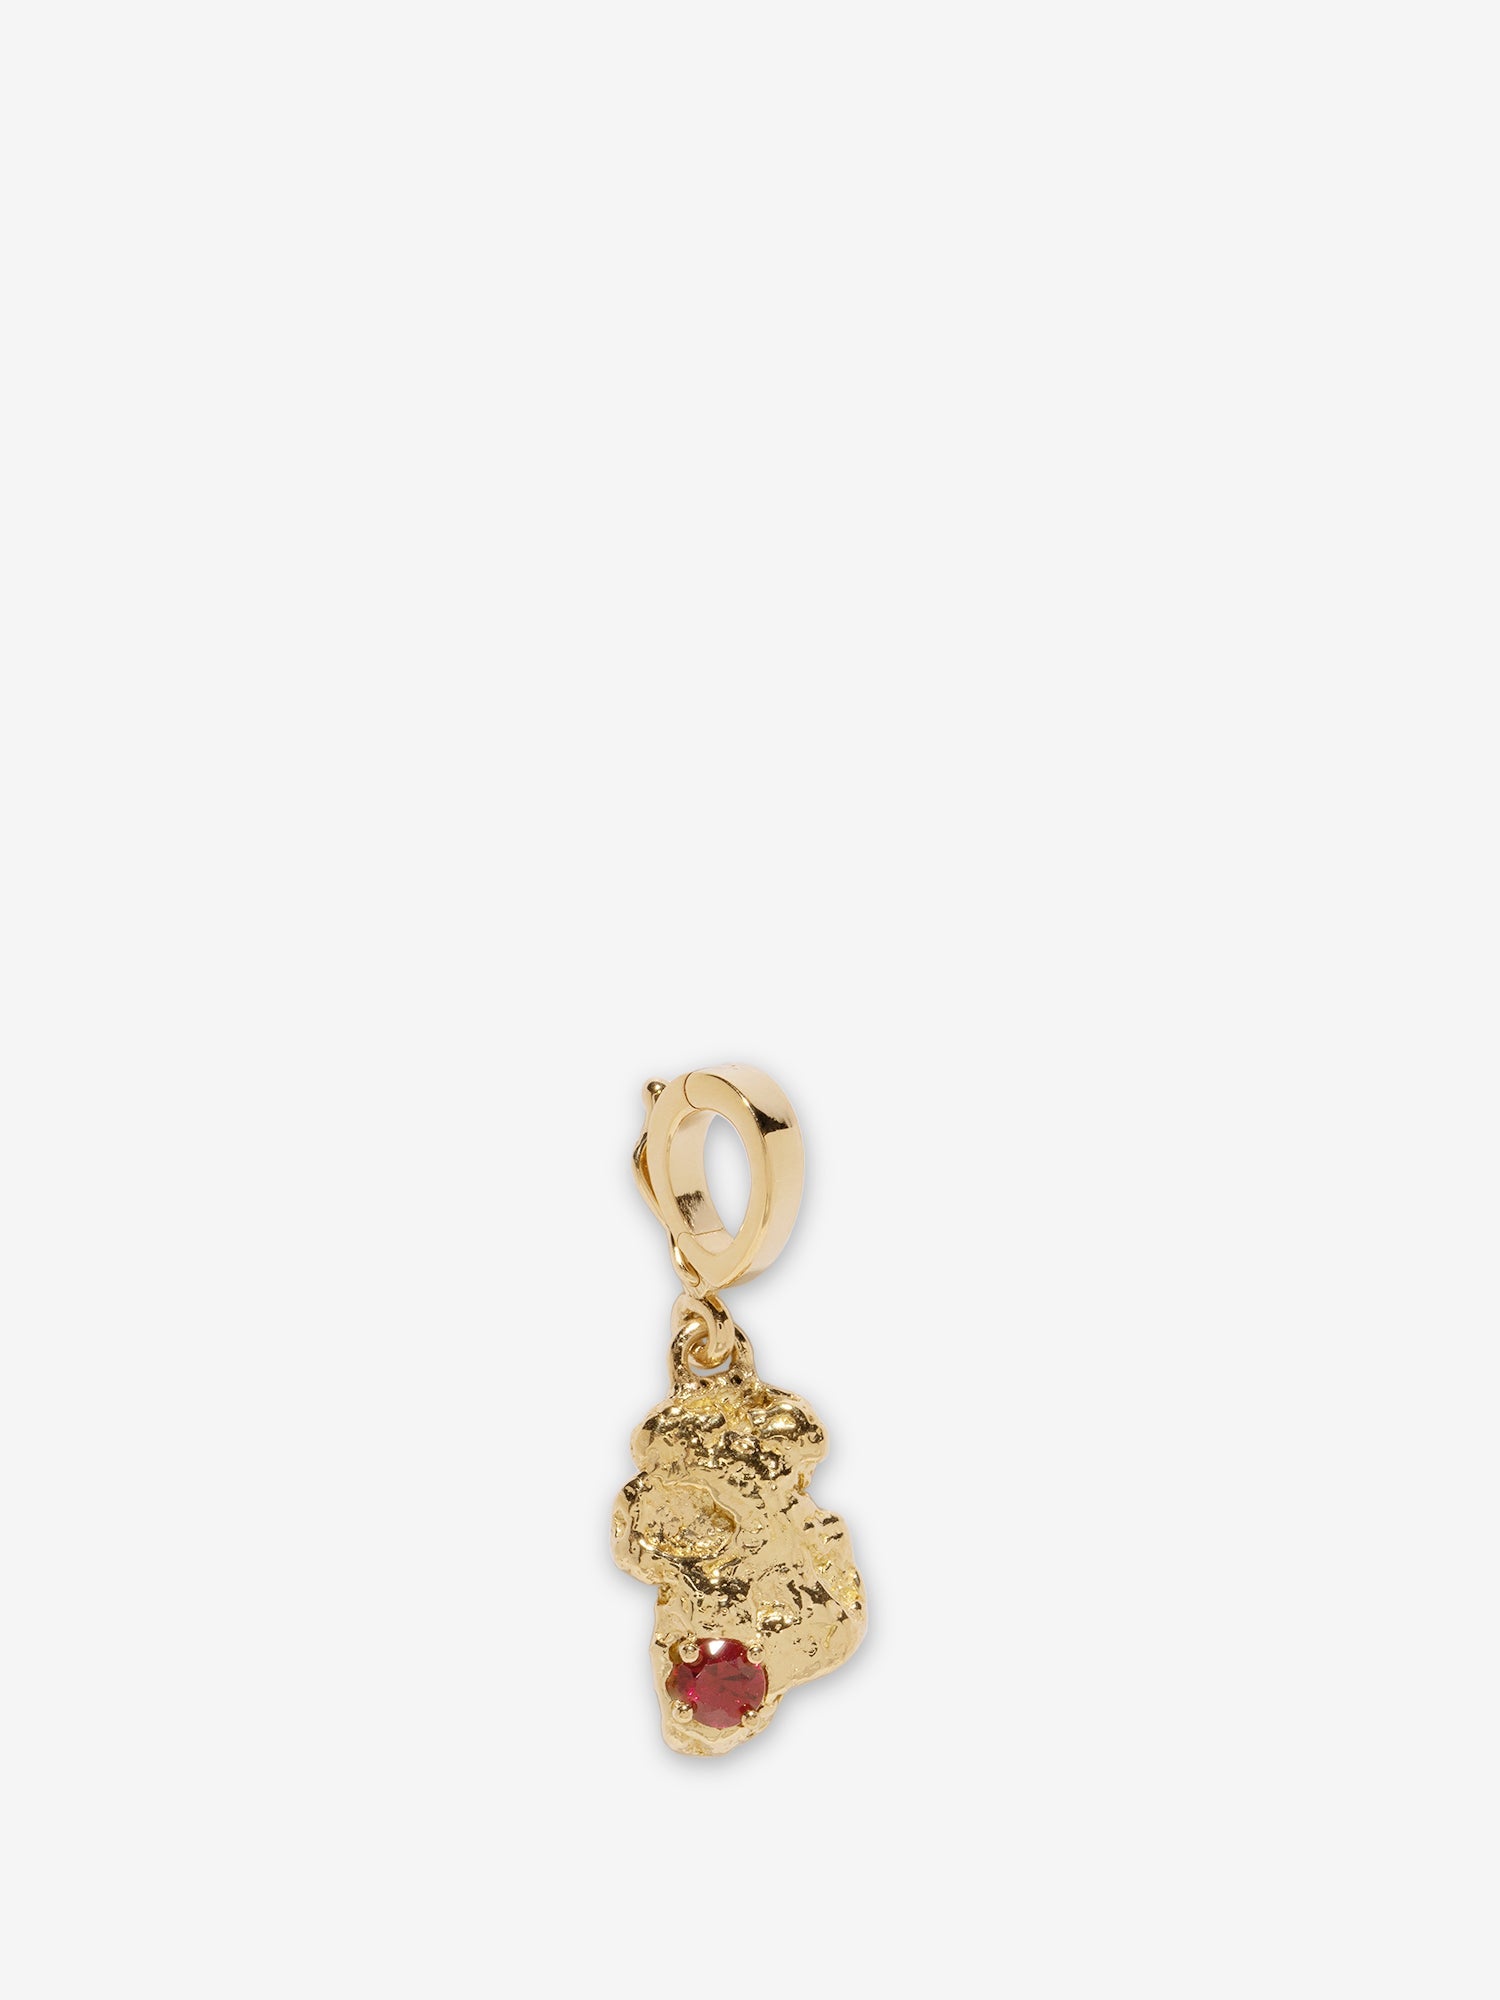 Ruby Scattered Small Gold Nugget Charm